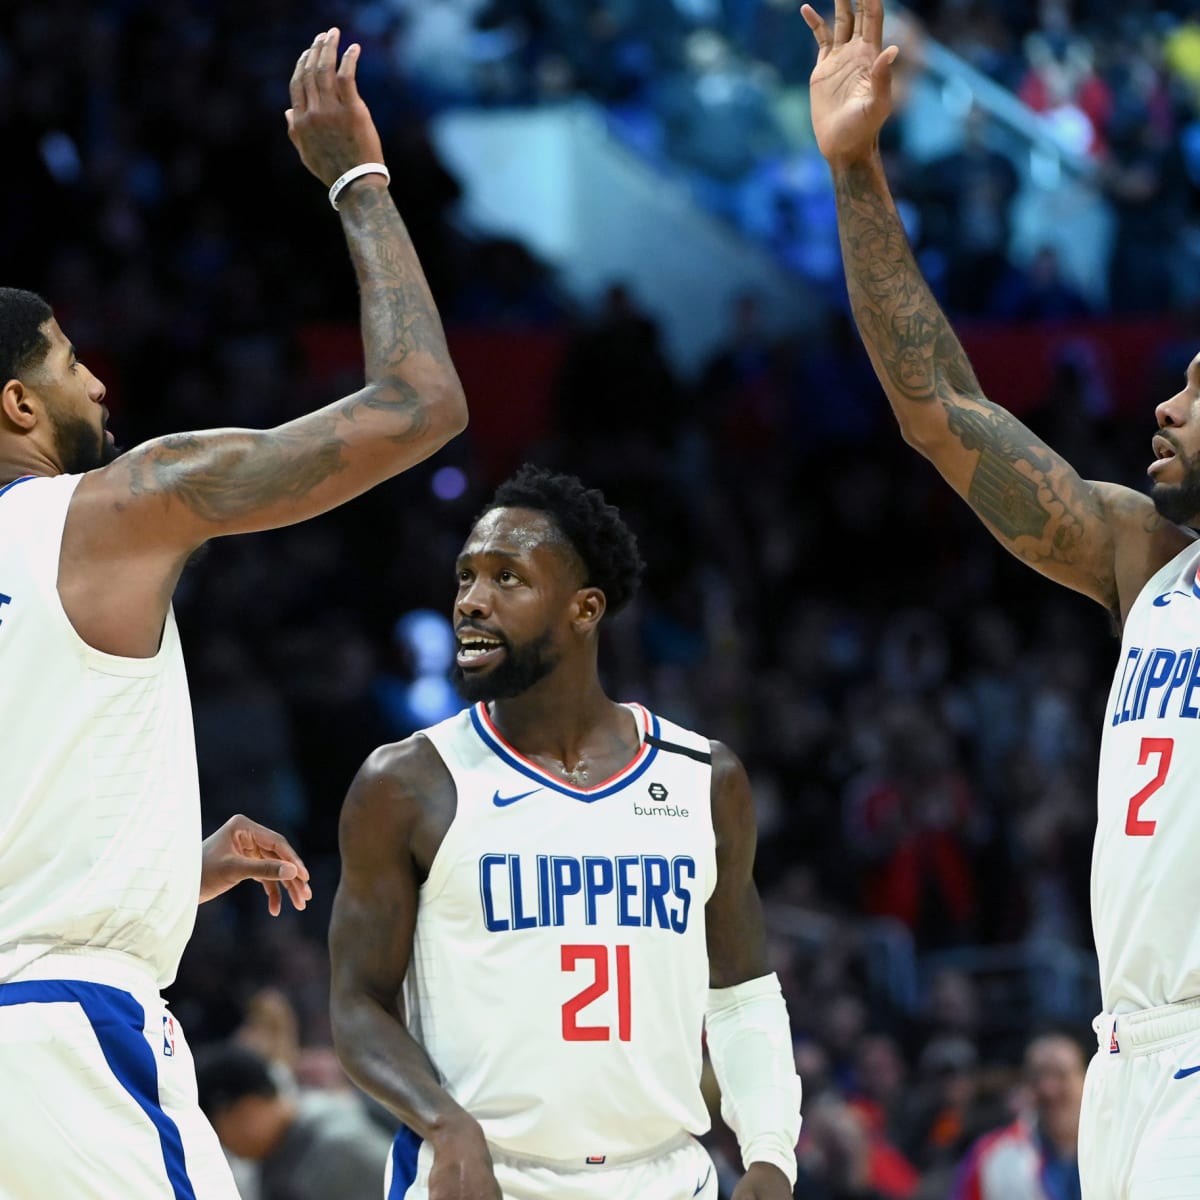 Paul George and Kawhi Leonard thriving for Clippers as NBA takes notice, NBA News